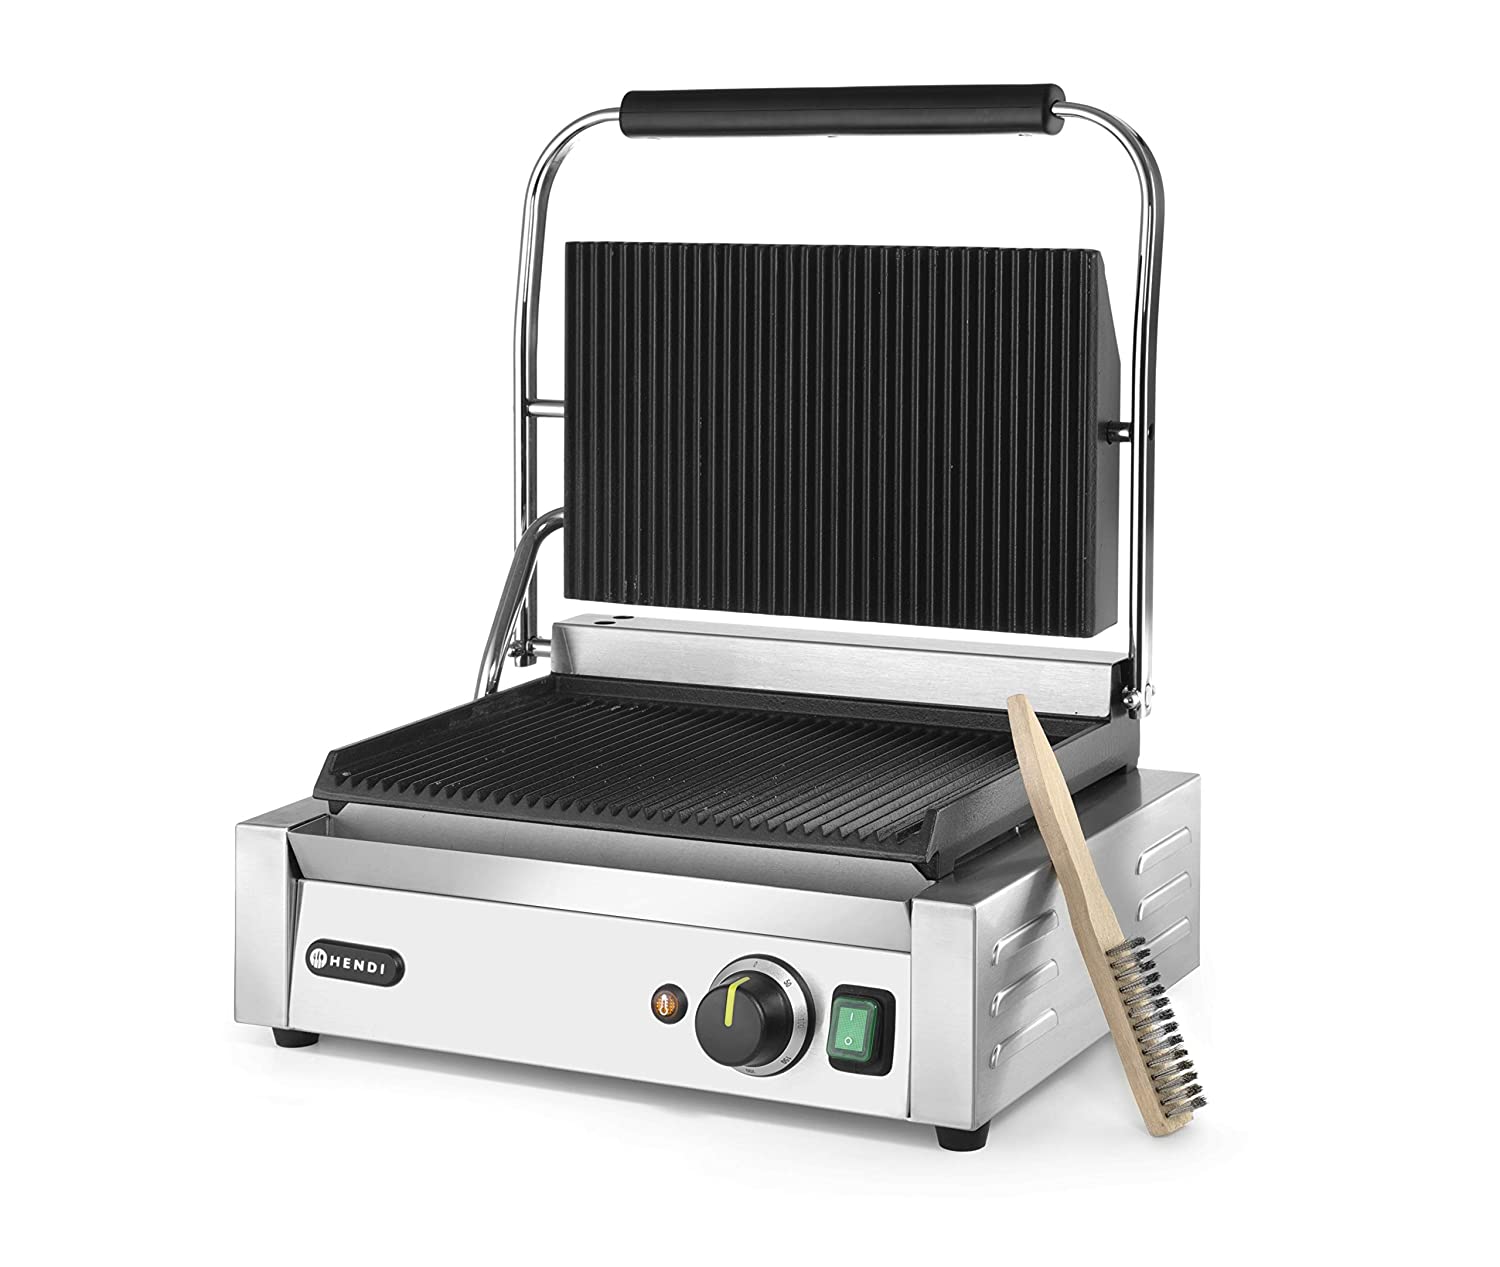 HENDI Contact grill, Panini, sandwich and contact grill, adjustable up to max. 300 °C, top height 530 mm, grill surface 340 x 230 mm, 230 V, 2200 W, 430 x 379 x (H) 210 mm, stainless steel